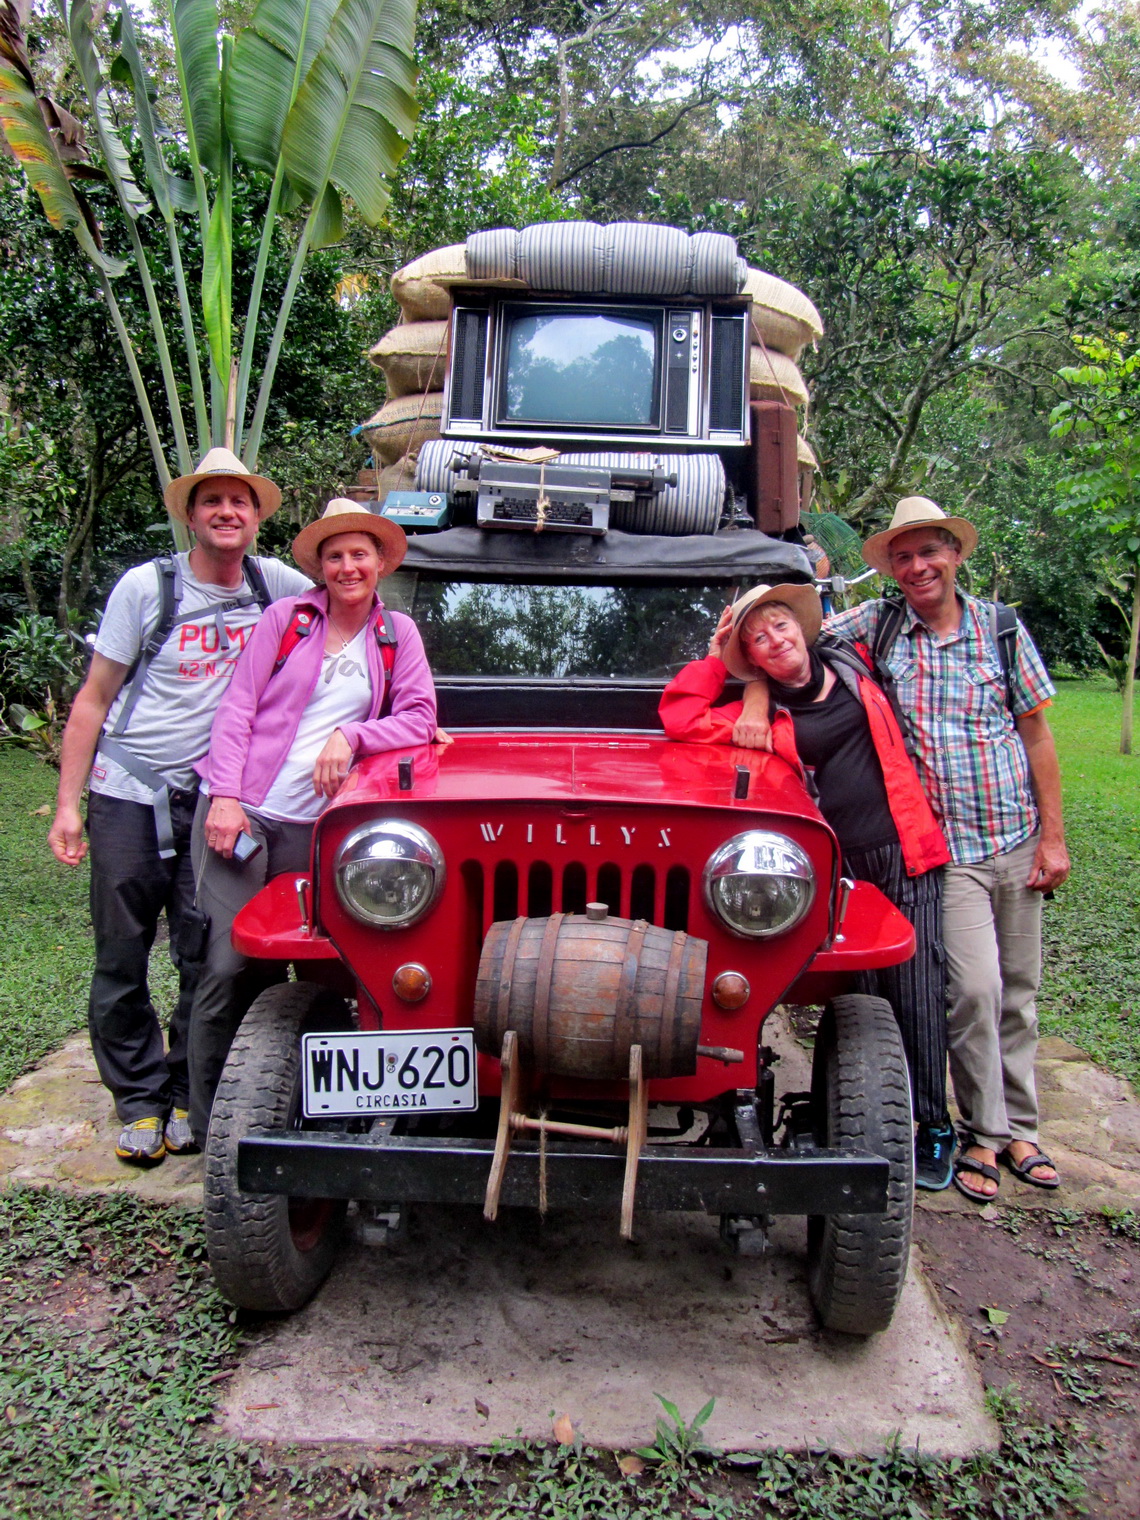 Kai, Vera, Marion and Alfred with the Colombian cult car Willys